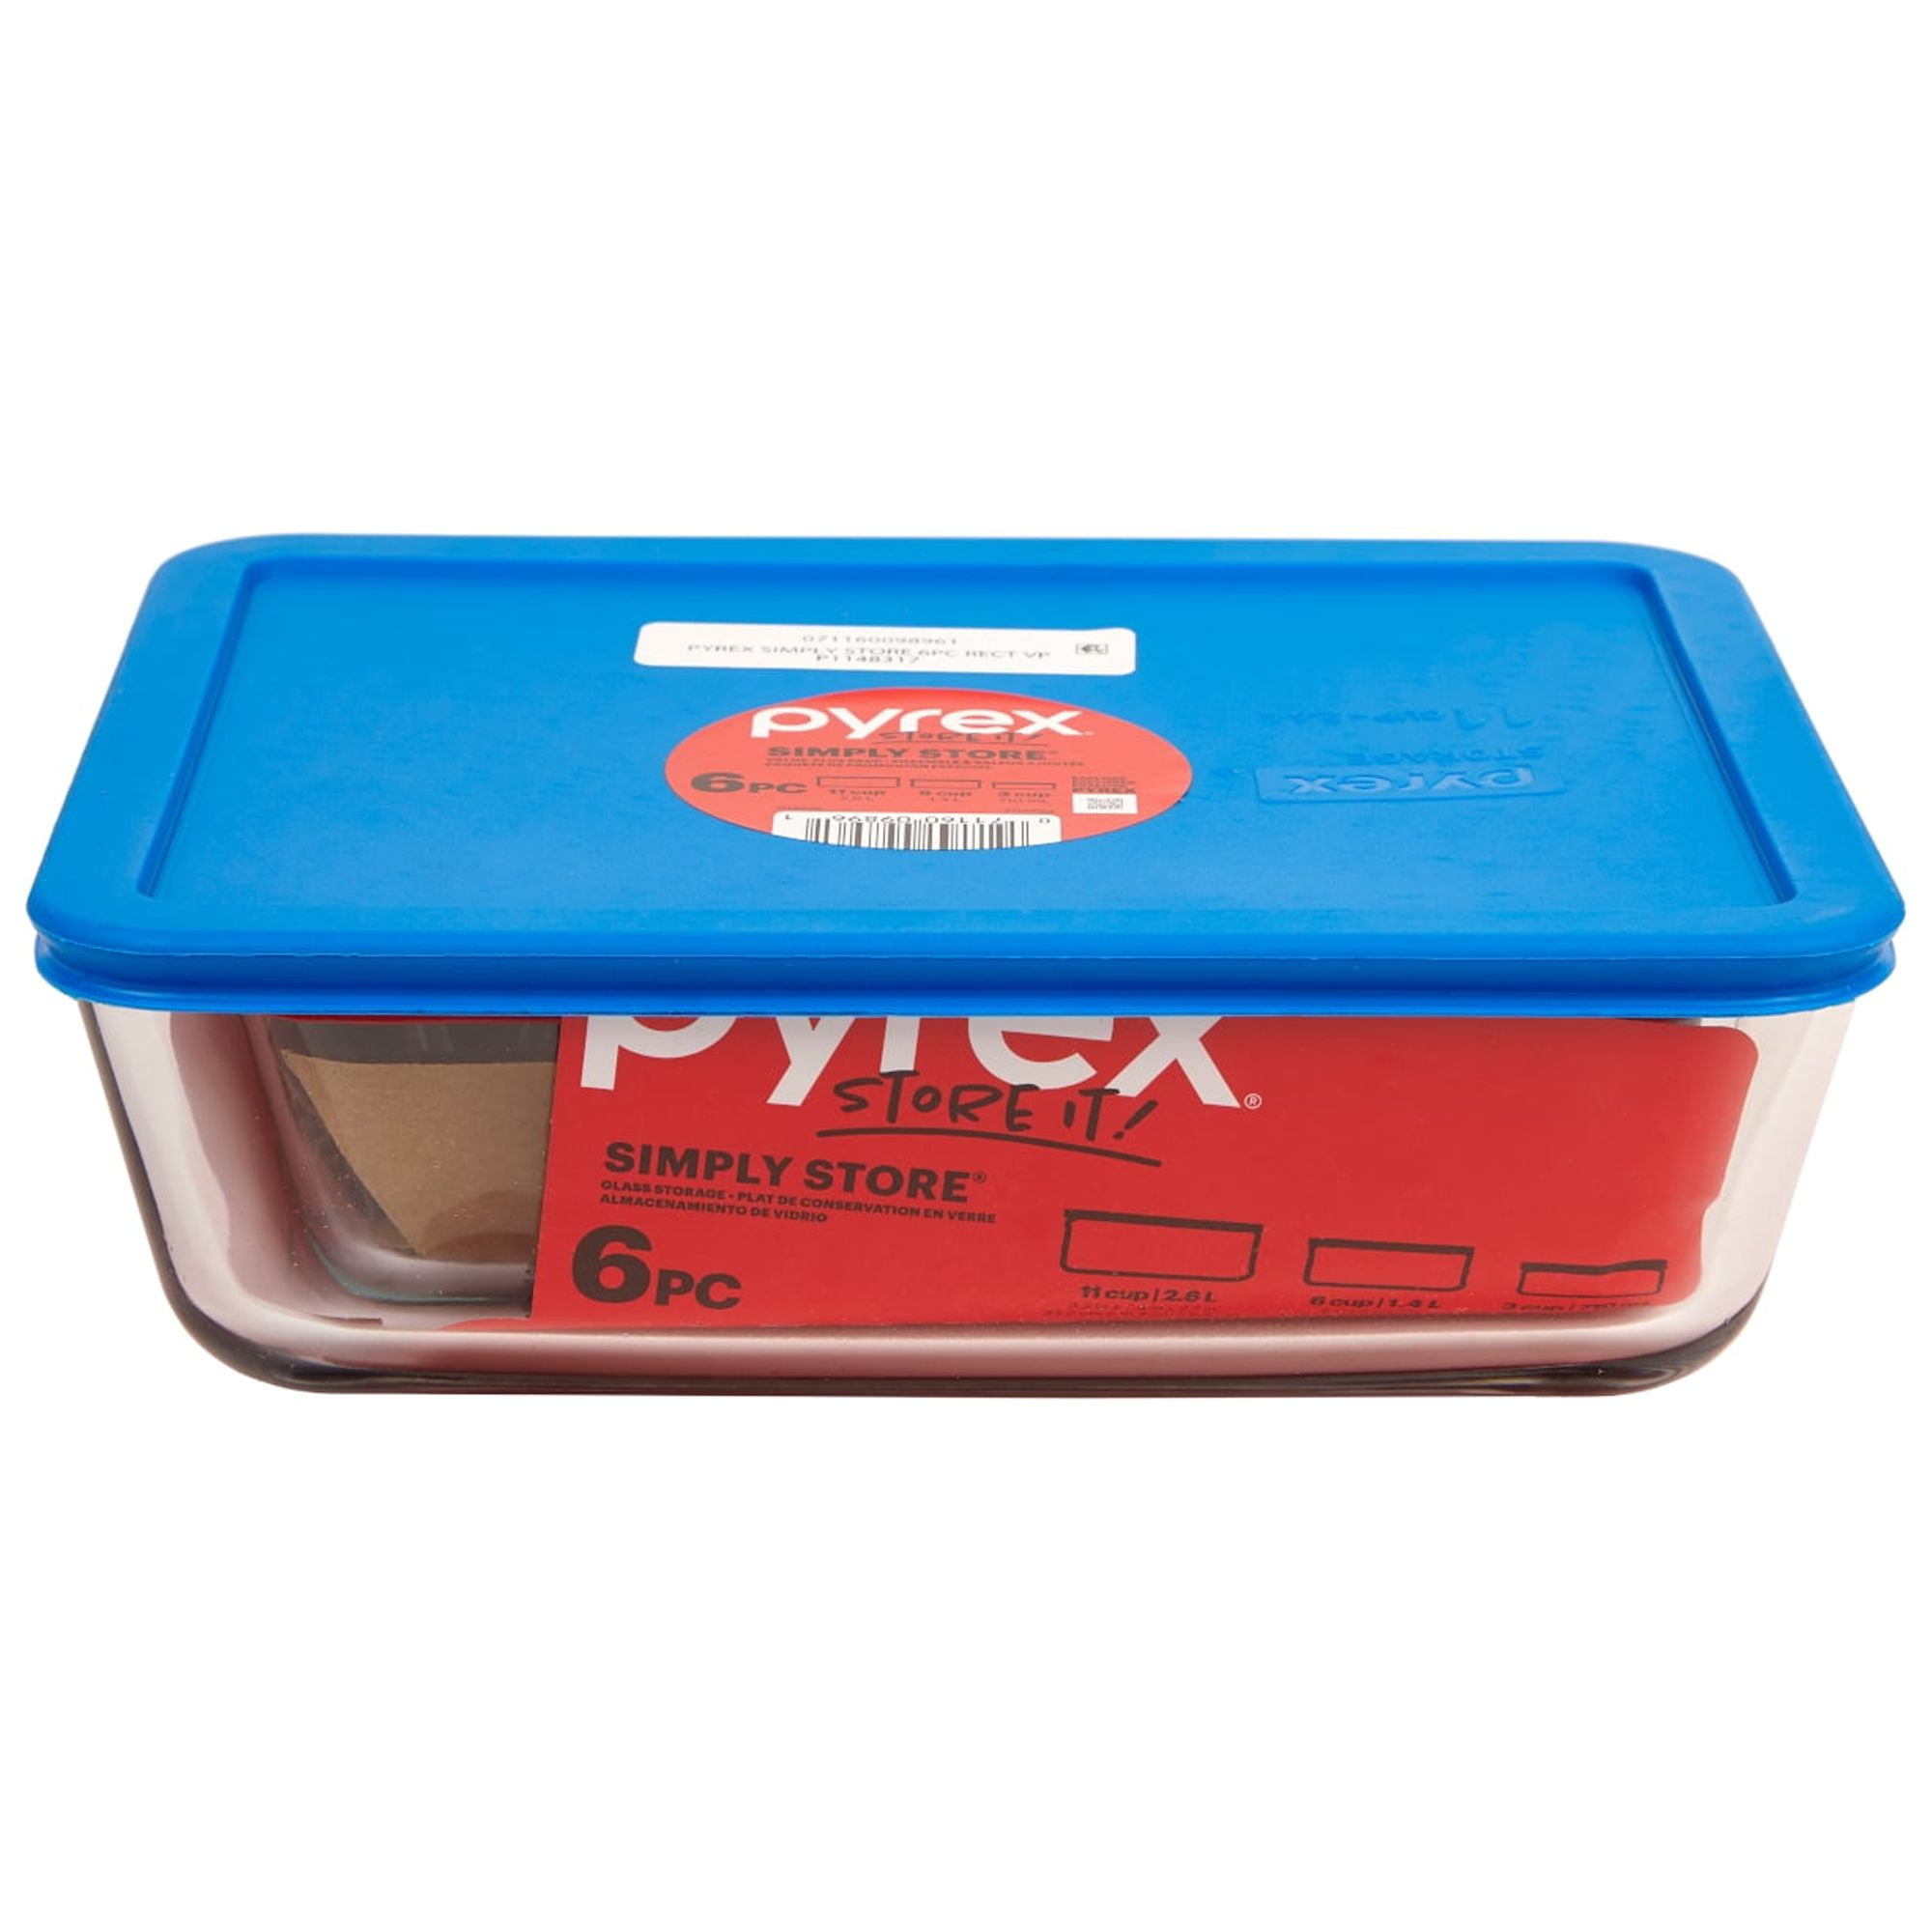 Pyrex Simply Store 7-Cup Round Glass Storage Container with Lid - Power  Townsend Company